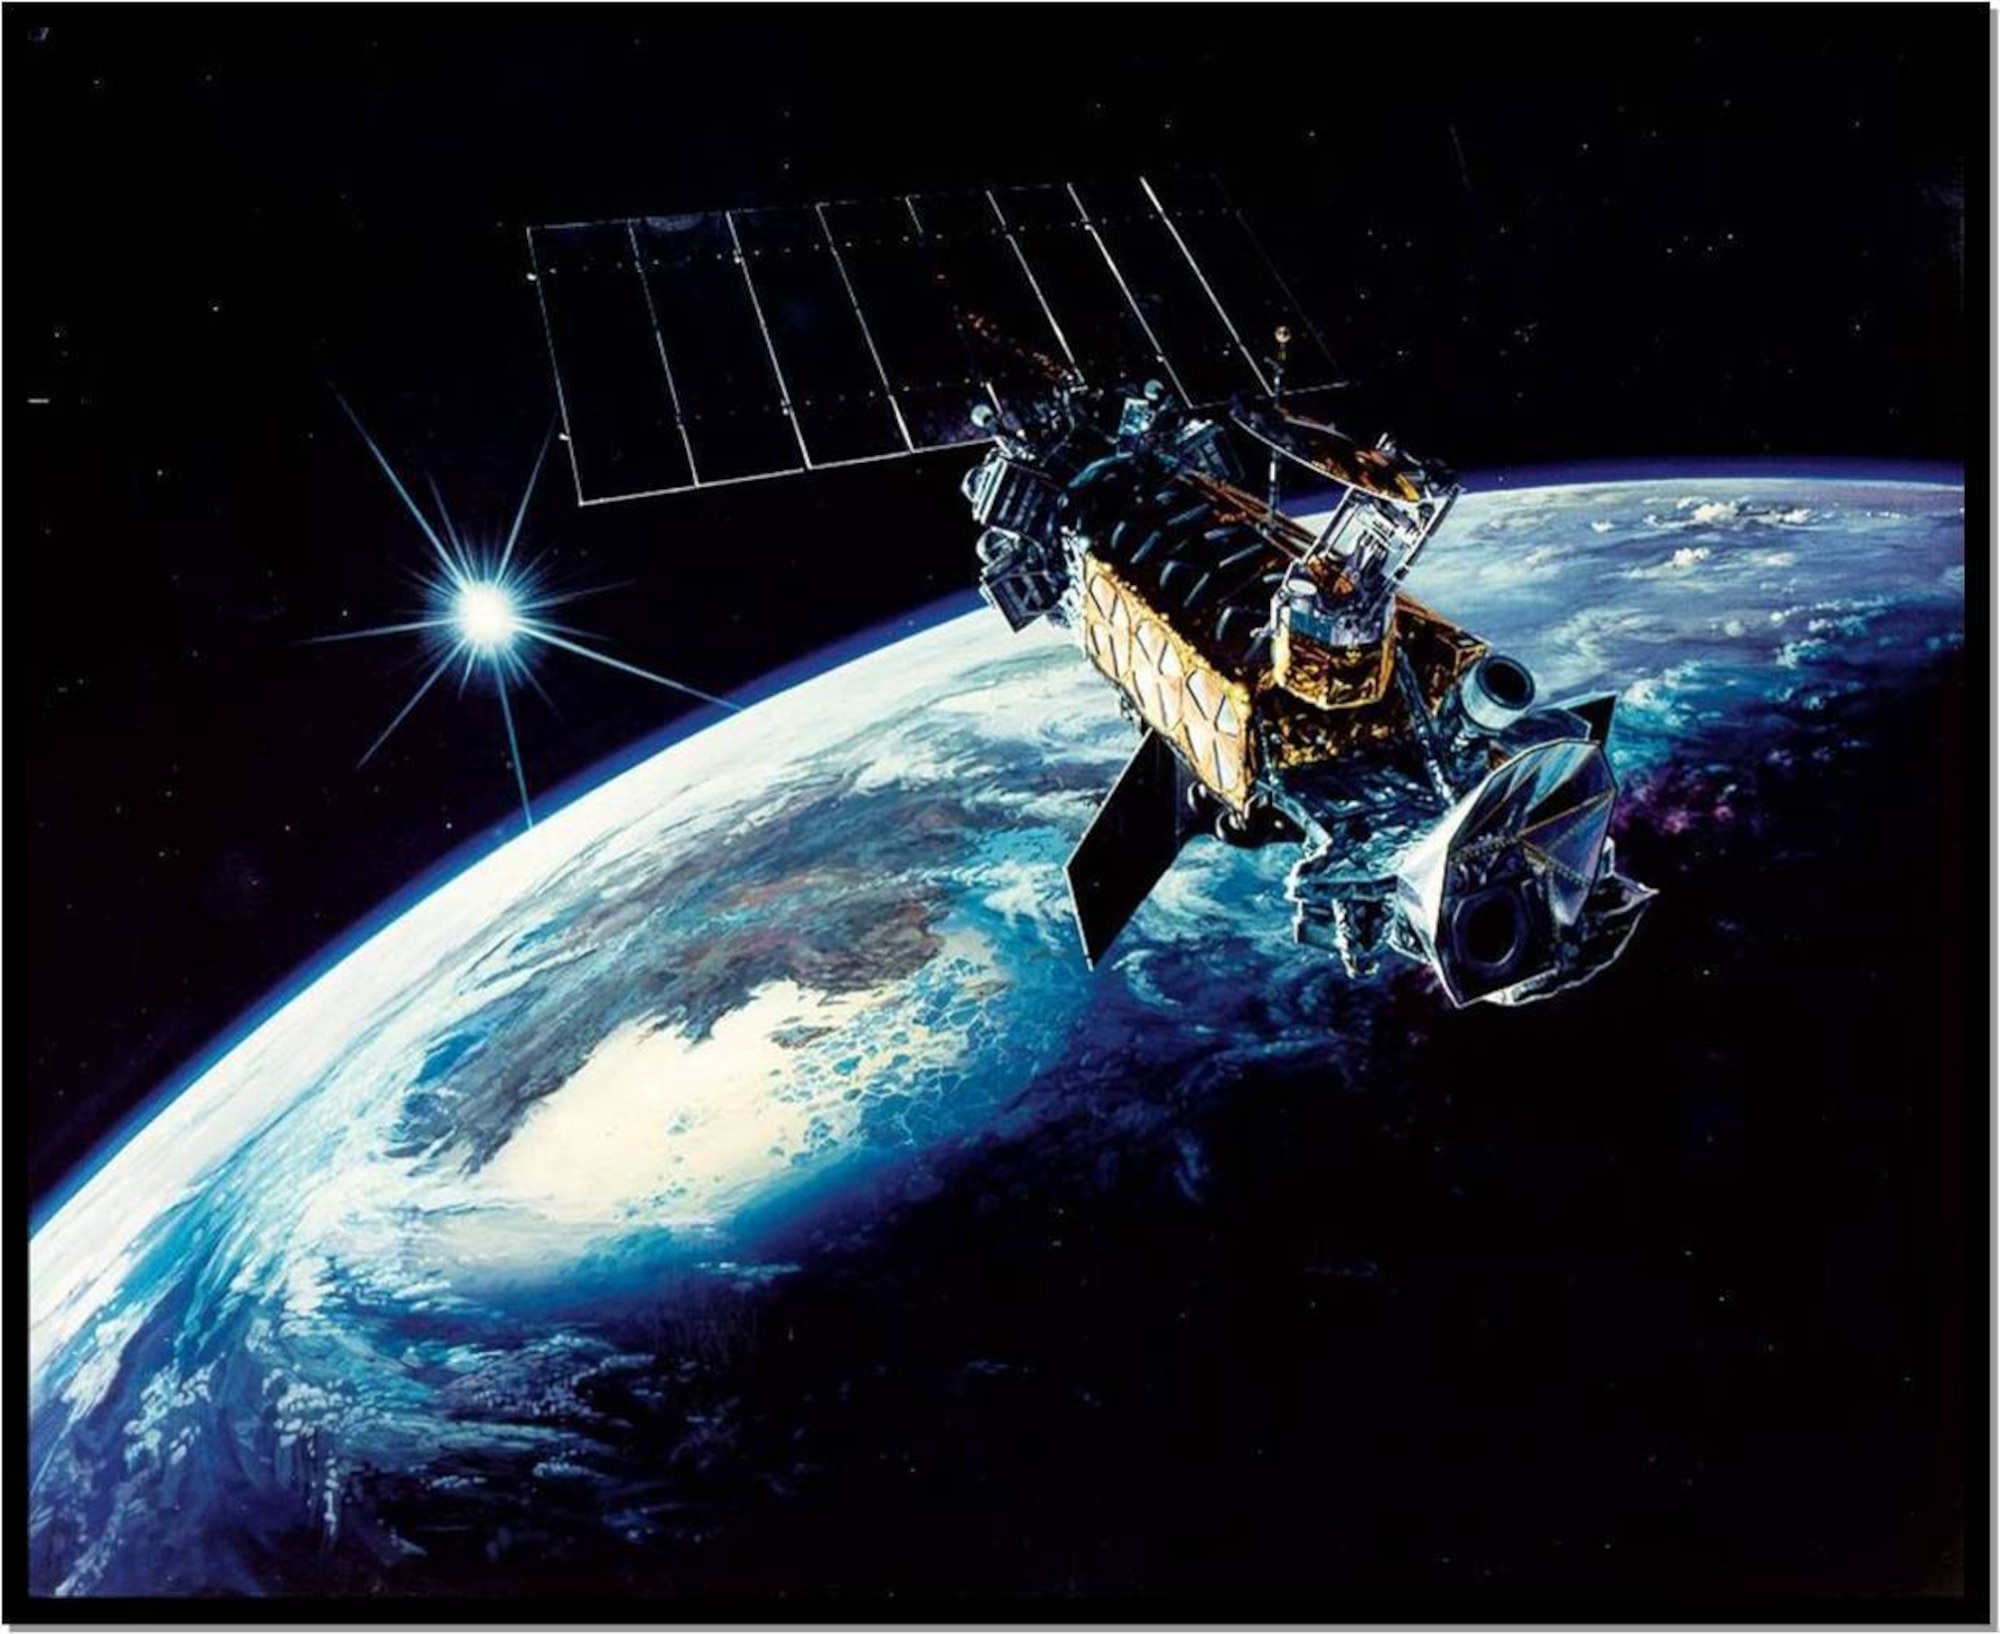 Defense Meteorological Satellite Program satellites, like the one shown in an artist's rendition here, provide critical, strategic, and tactical meteorological and environmental data to military and civilian users around the world. Since the mid-1960's, when the Department of Defense initiated the DMSP, low, earth-orbiting satellites have provided the military with important environmental information. Each DMSP satellite has a 101-minute orbit and provides global coverage twice per day. (Courtesy illustration)